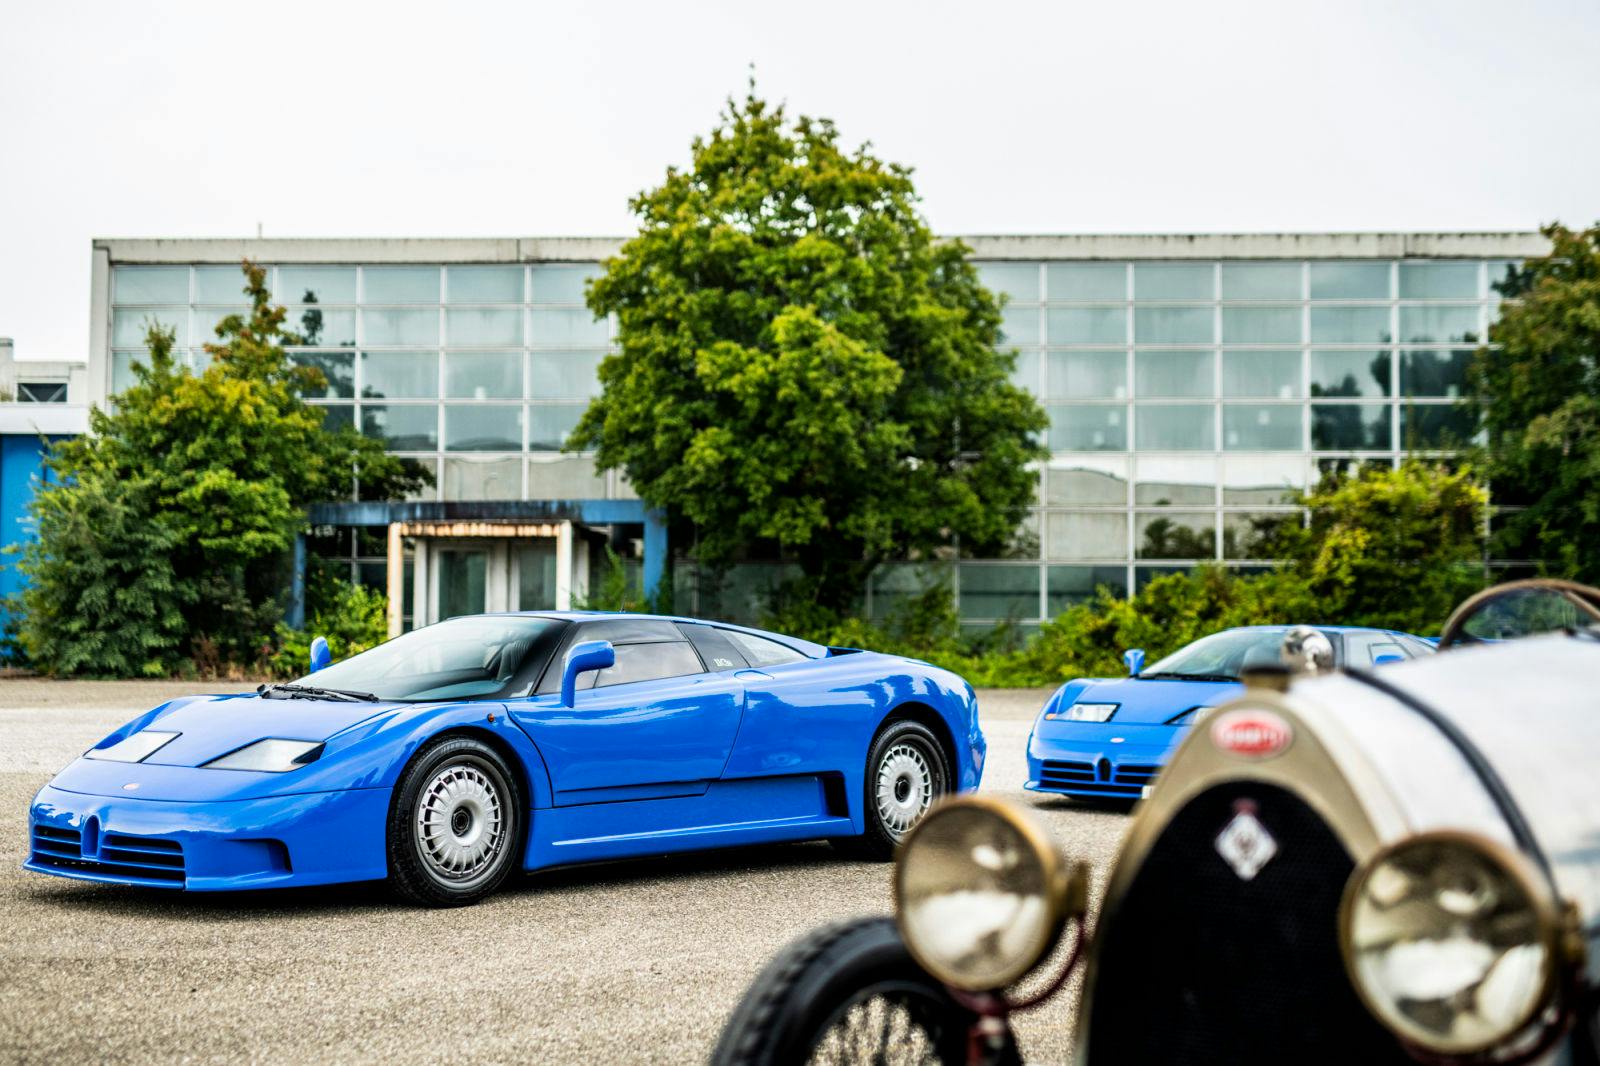 A total of twelve EB110s gathered together at the “Blue Factory” in Campogalliano, as a pilgrimage to the birthplace of the legendary Bugatti EB110.